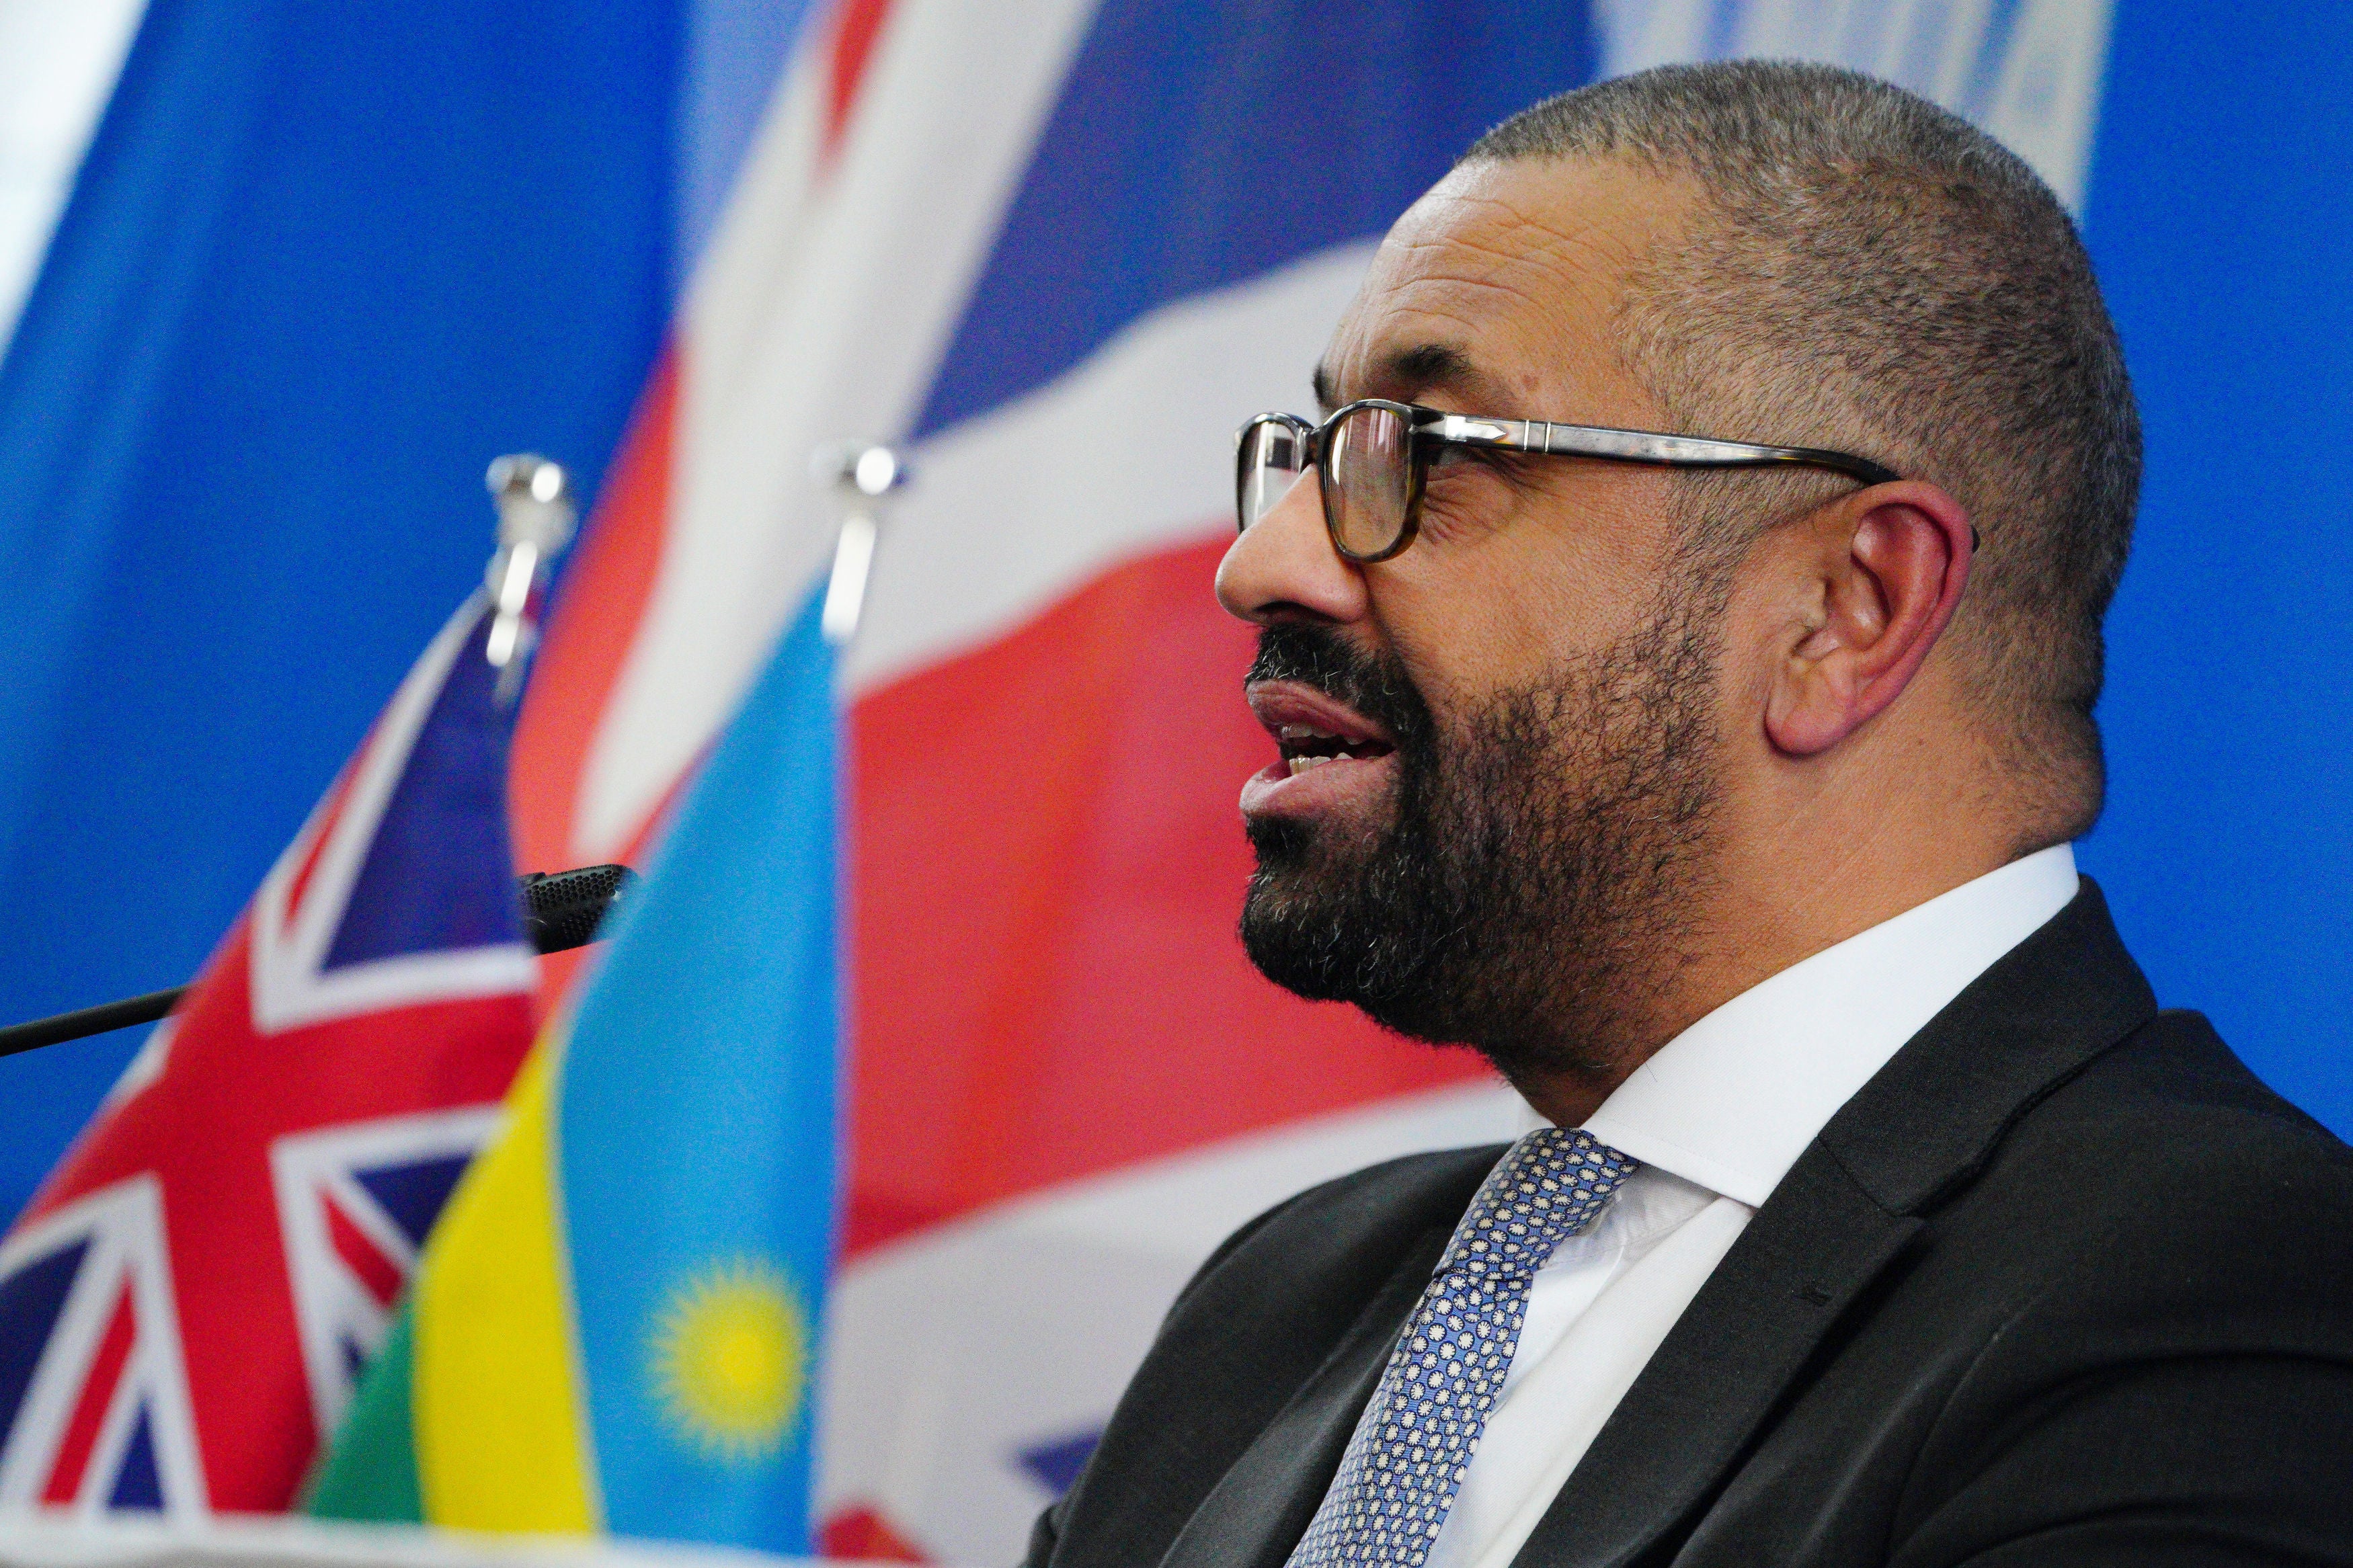 James Cleverly at a press conference in Rwanda